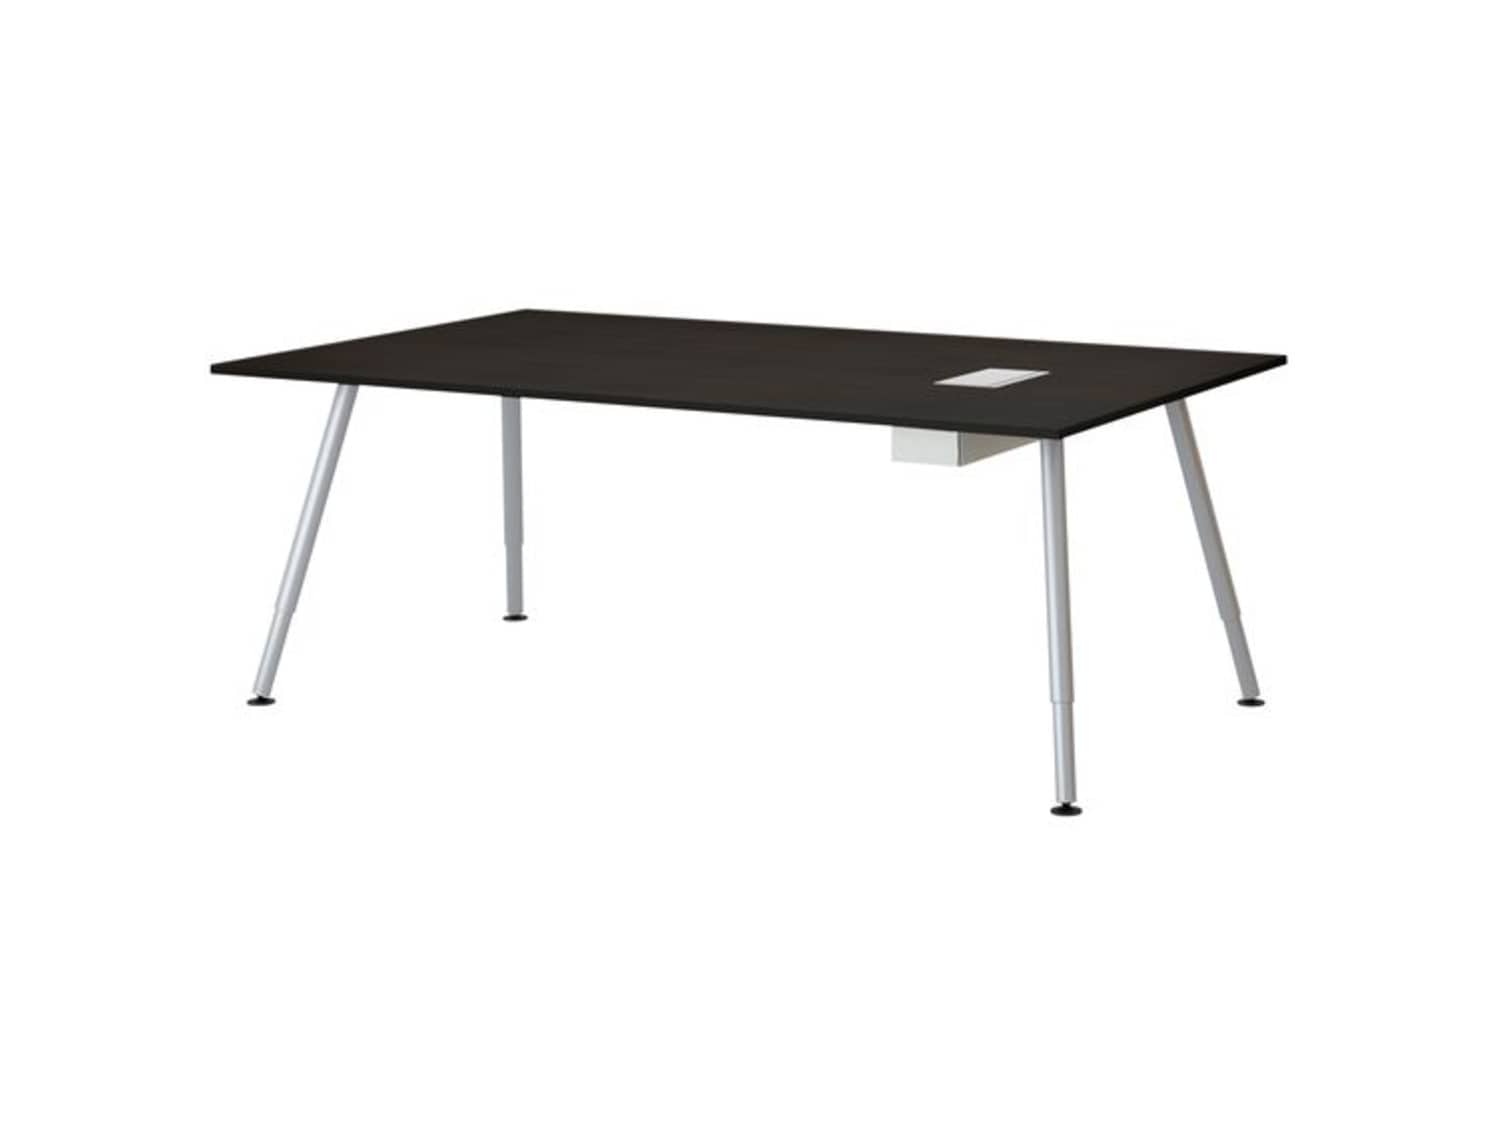 Ikea Galant Conference Studio Table Apartment Therapy S Bazaar